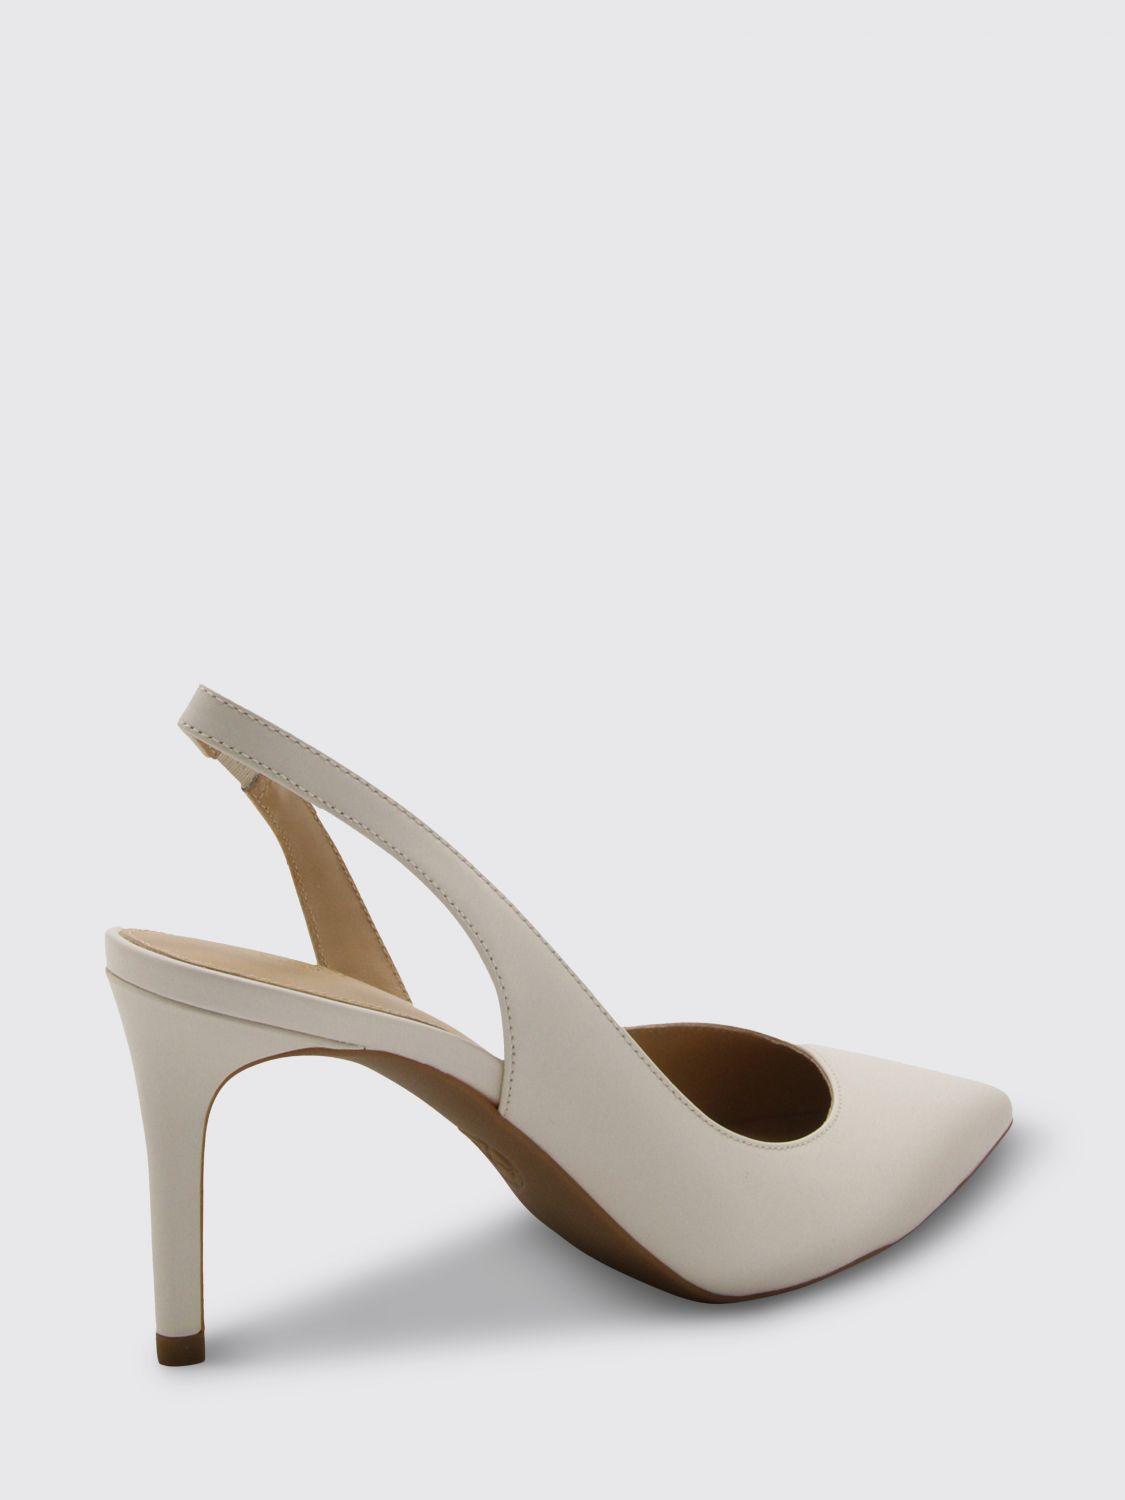 Thego Cream Patent Leather Heels by Mollini | Shop Online at Mollini